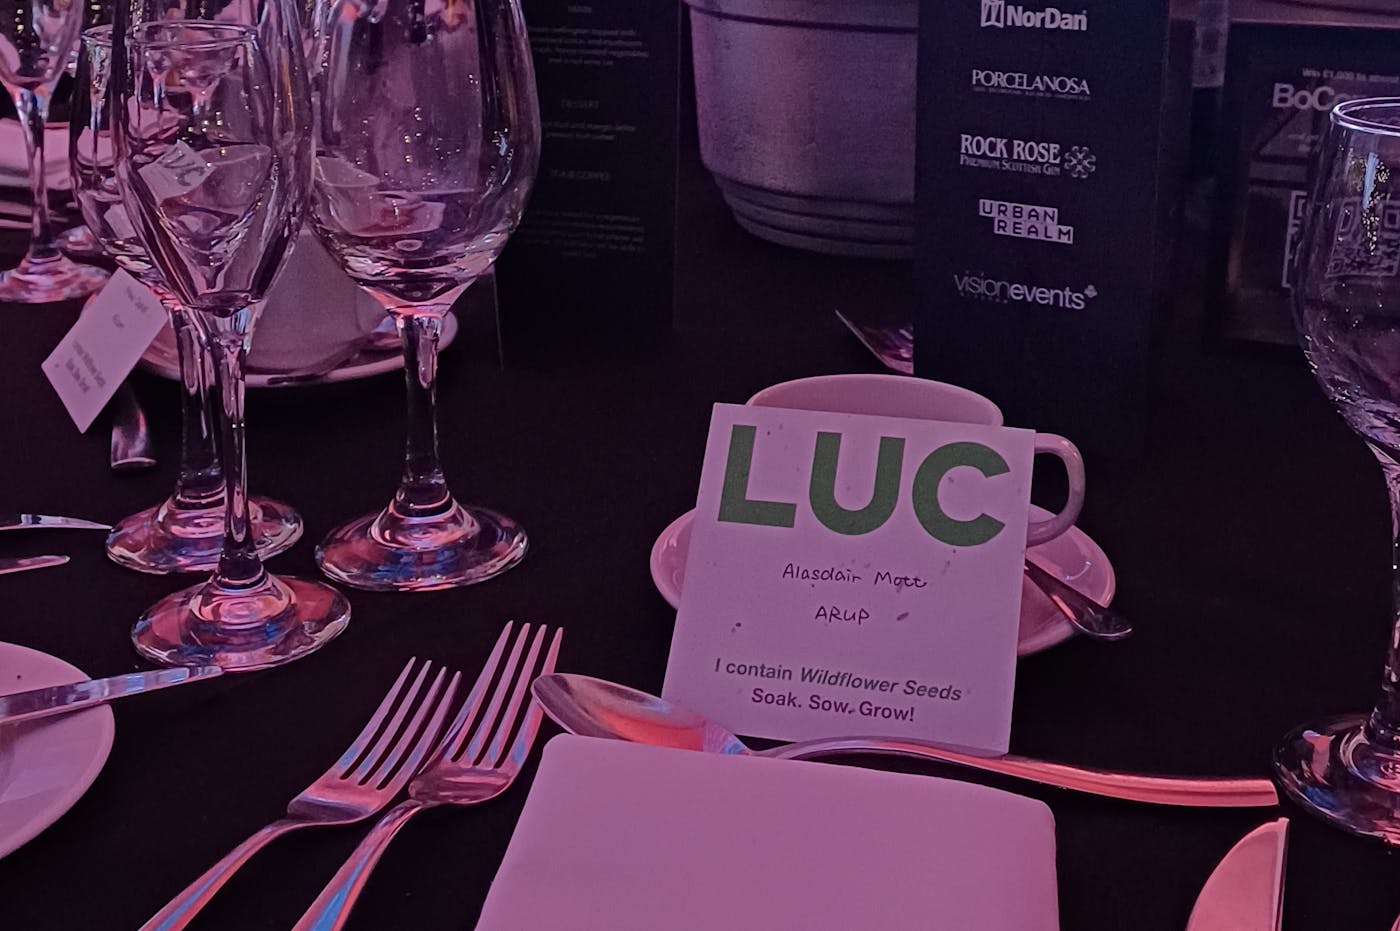 Image of table setting at awards with LUC seed coasted used as name card